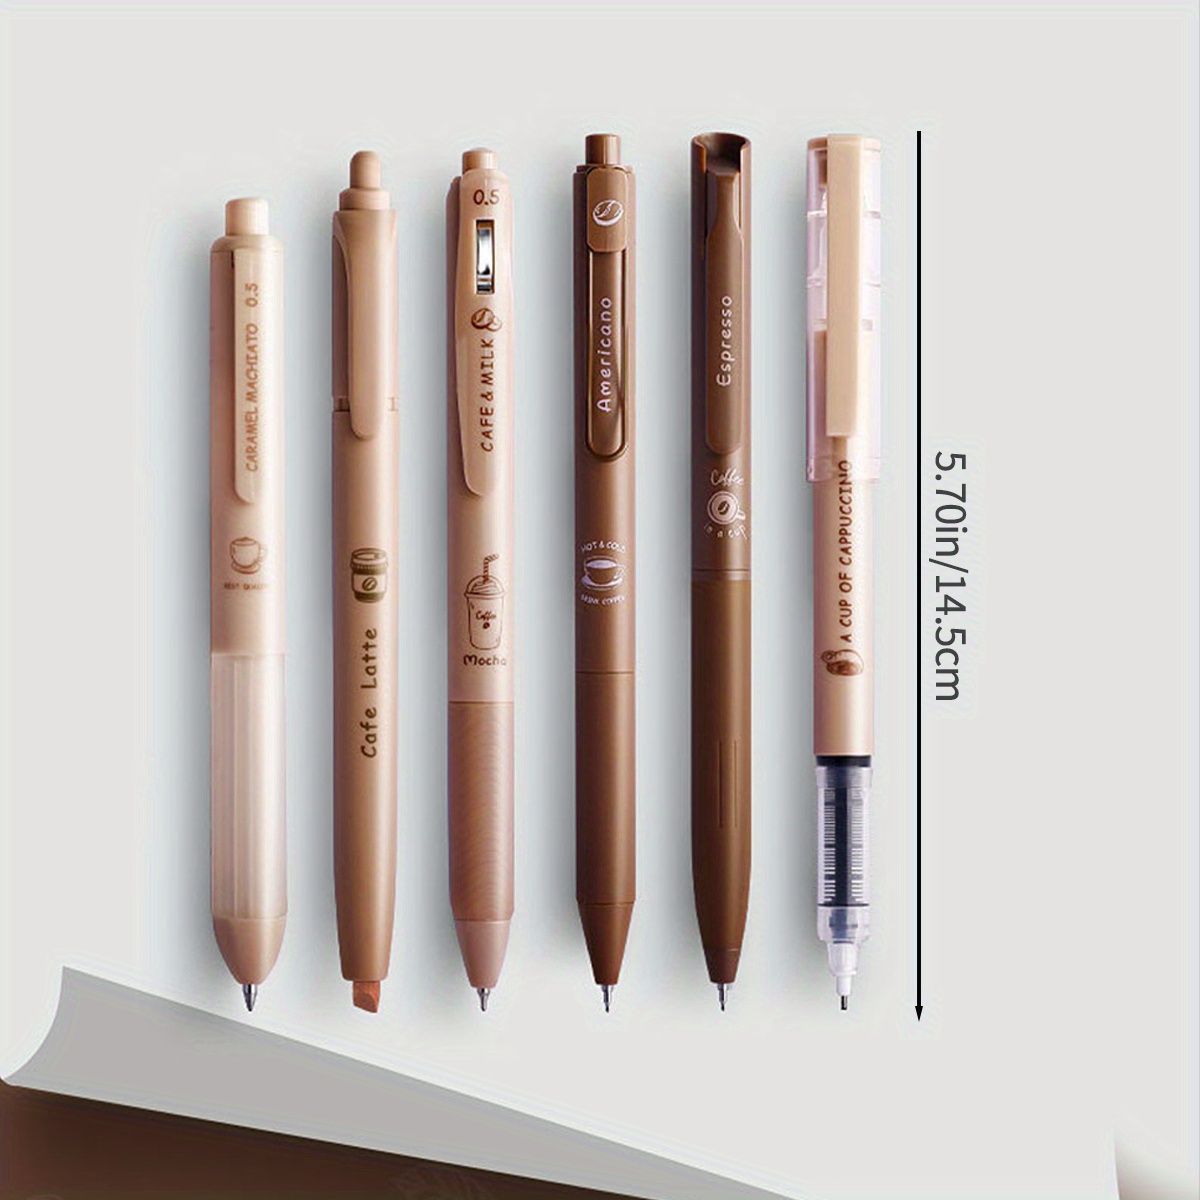 6-Pack Coffee-Colored Gel Pens - 0.5mm Tip, Quick-Drying Ink, Large  Capacity for Signature Writing!